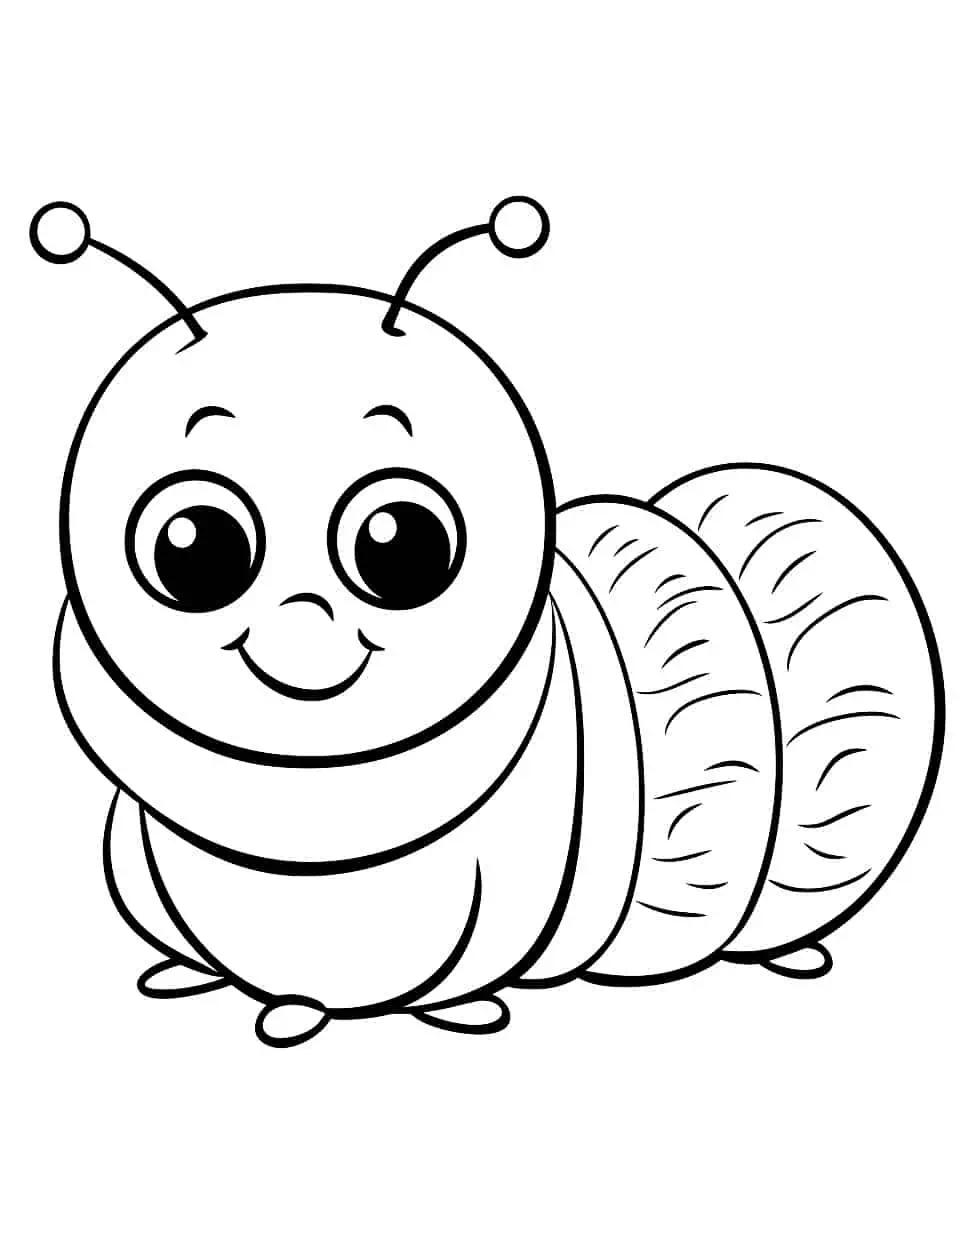 Charming Caterpillar Butterfly Coloring Page - A cute coloring page showcasing a smiling caterpillar ready to transform into a butterfly.